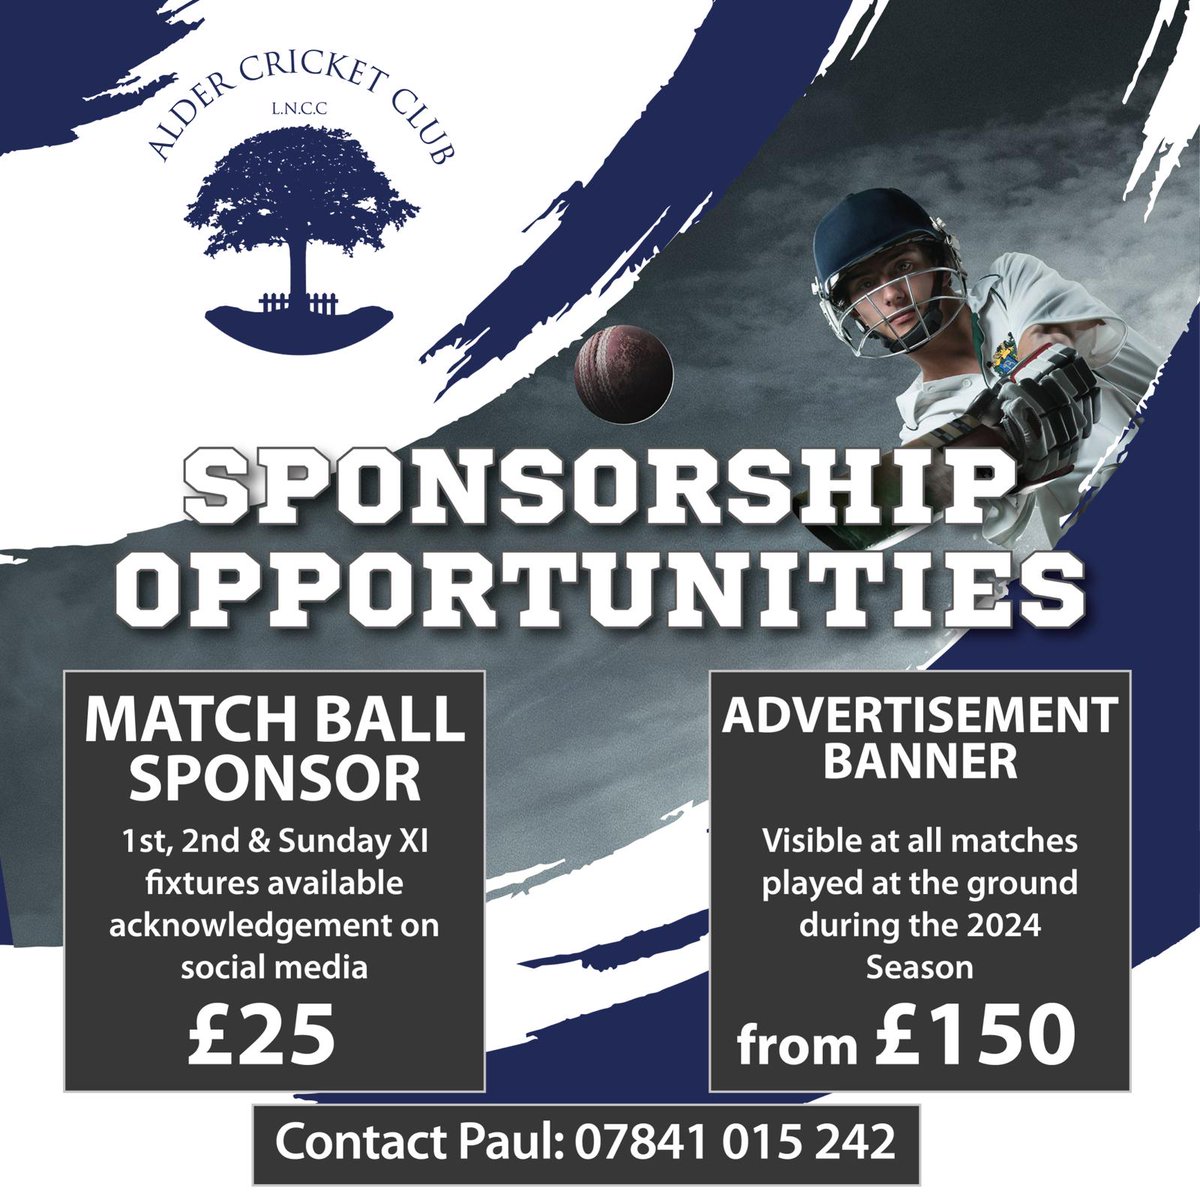 Alder Cricket Club 2024 Sponsorship Opportunities! Get your brand or business seen and support the Alder CC teams with our latest sponsorship opportunities. For all sponsorship enquiries please contact Paul on 07841 015242 or drop us a DM to dicsuss further details and pricing.